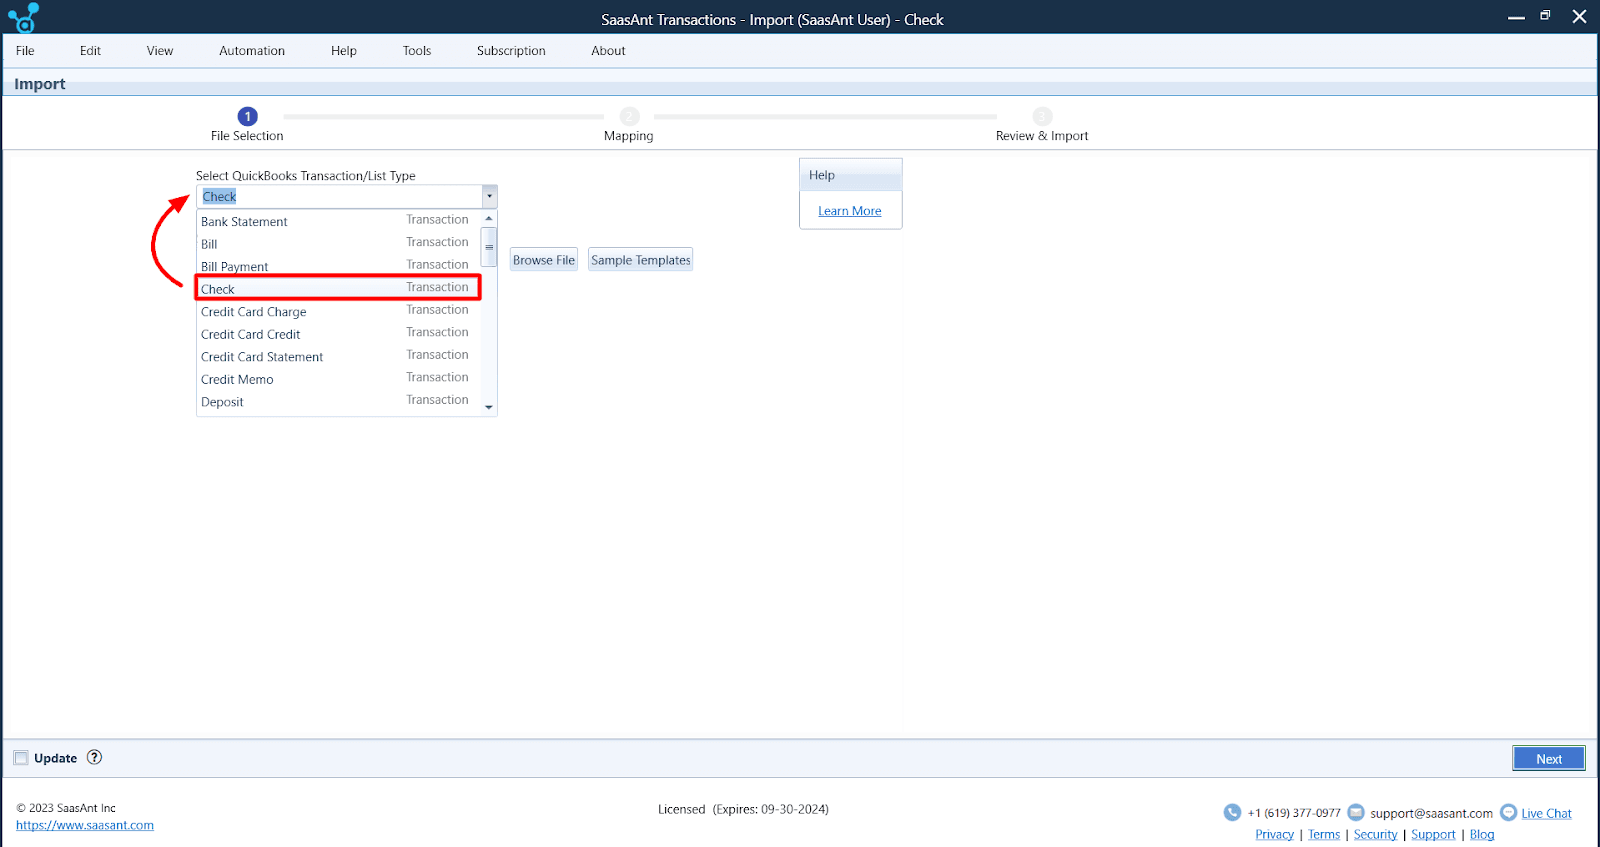 Choose the transaction type as Checks to import